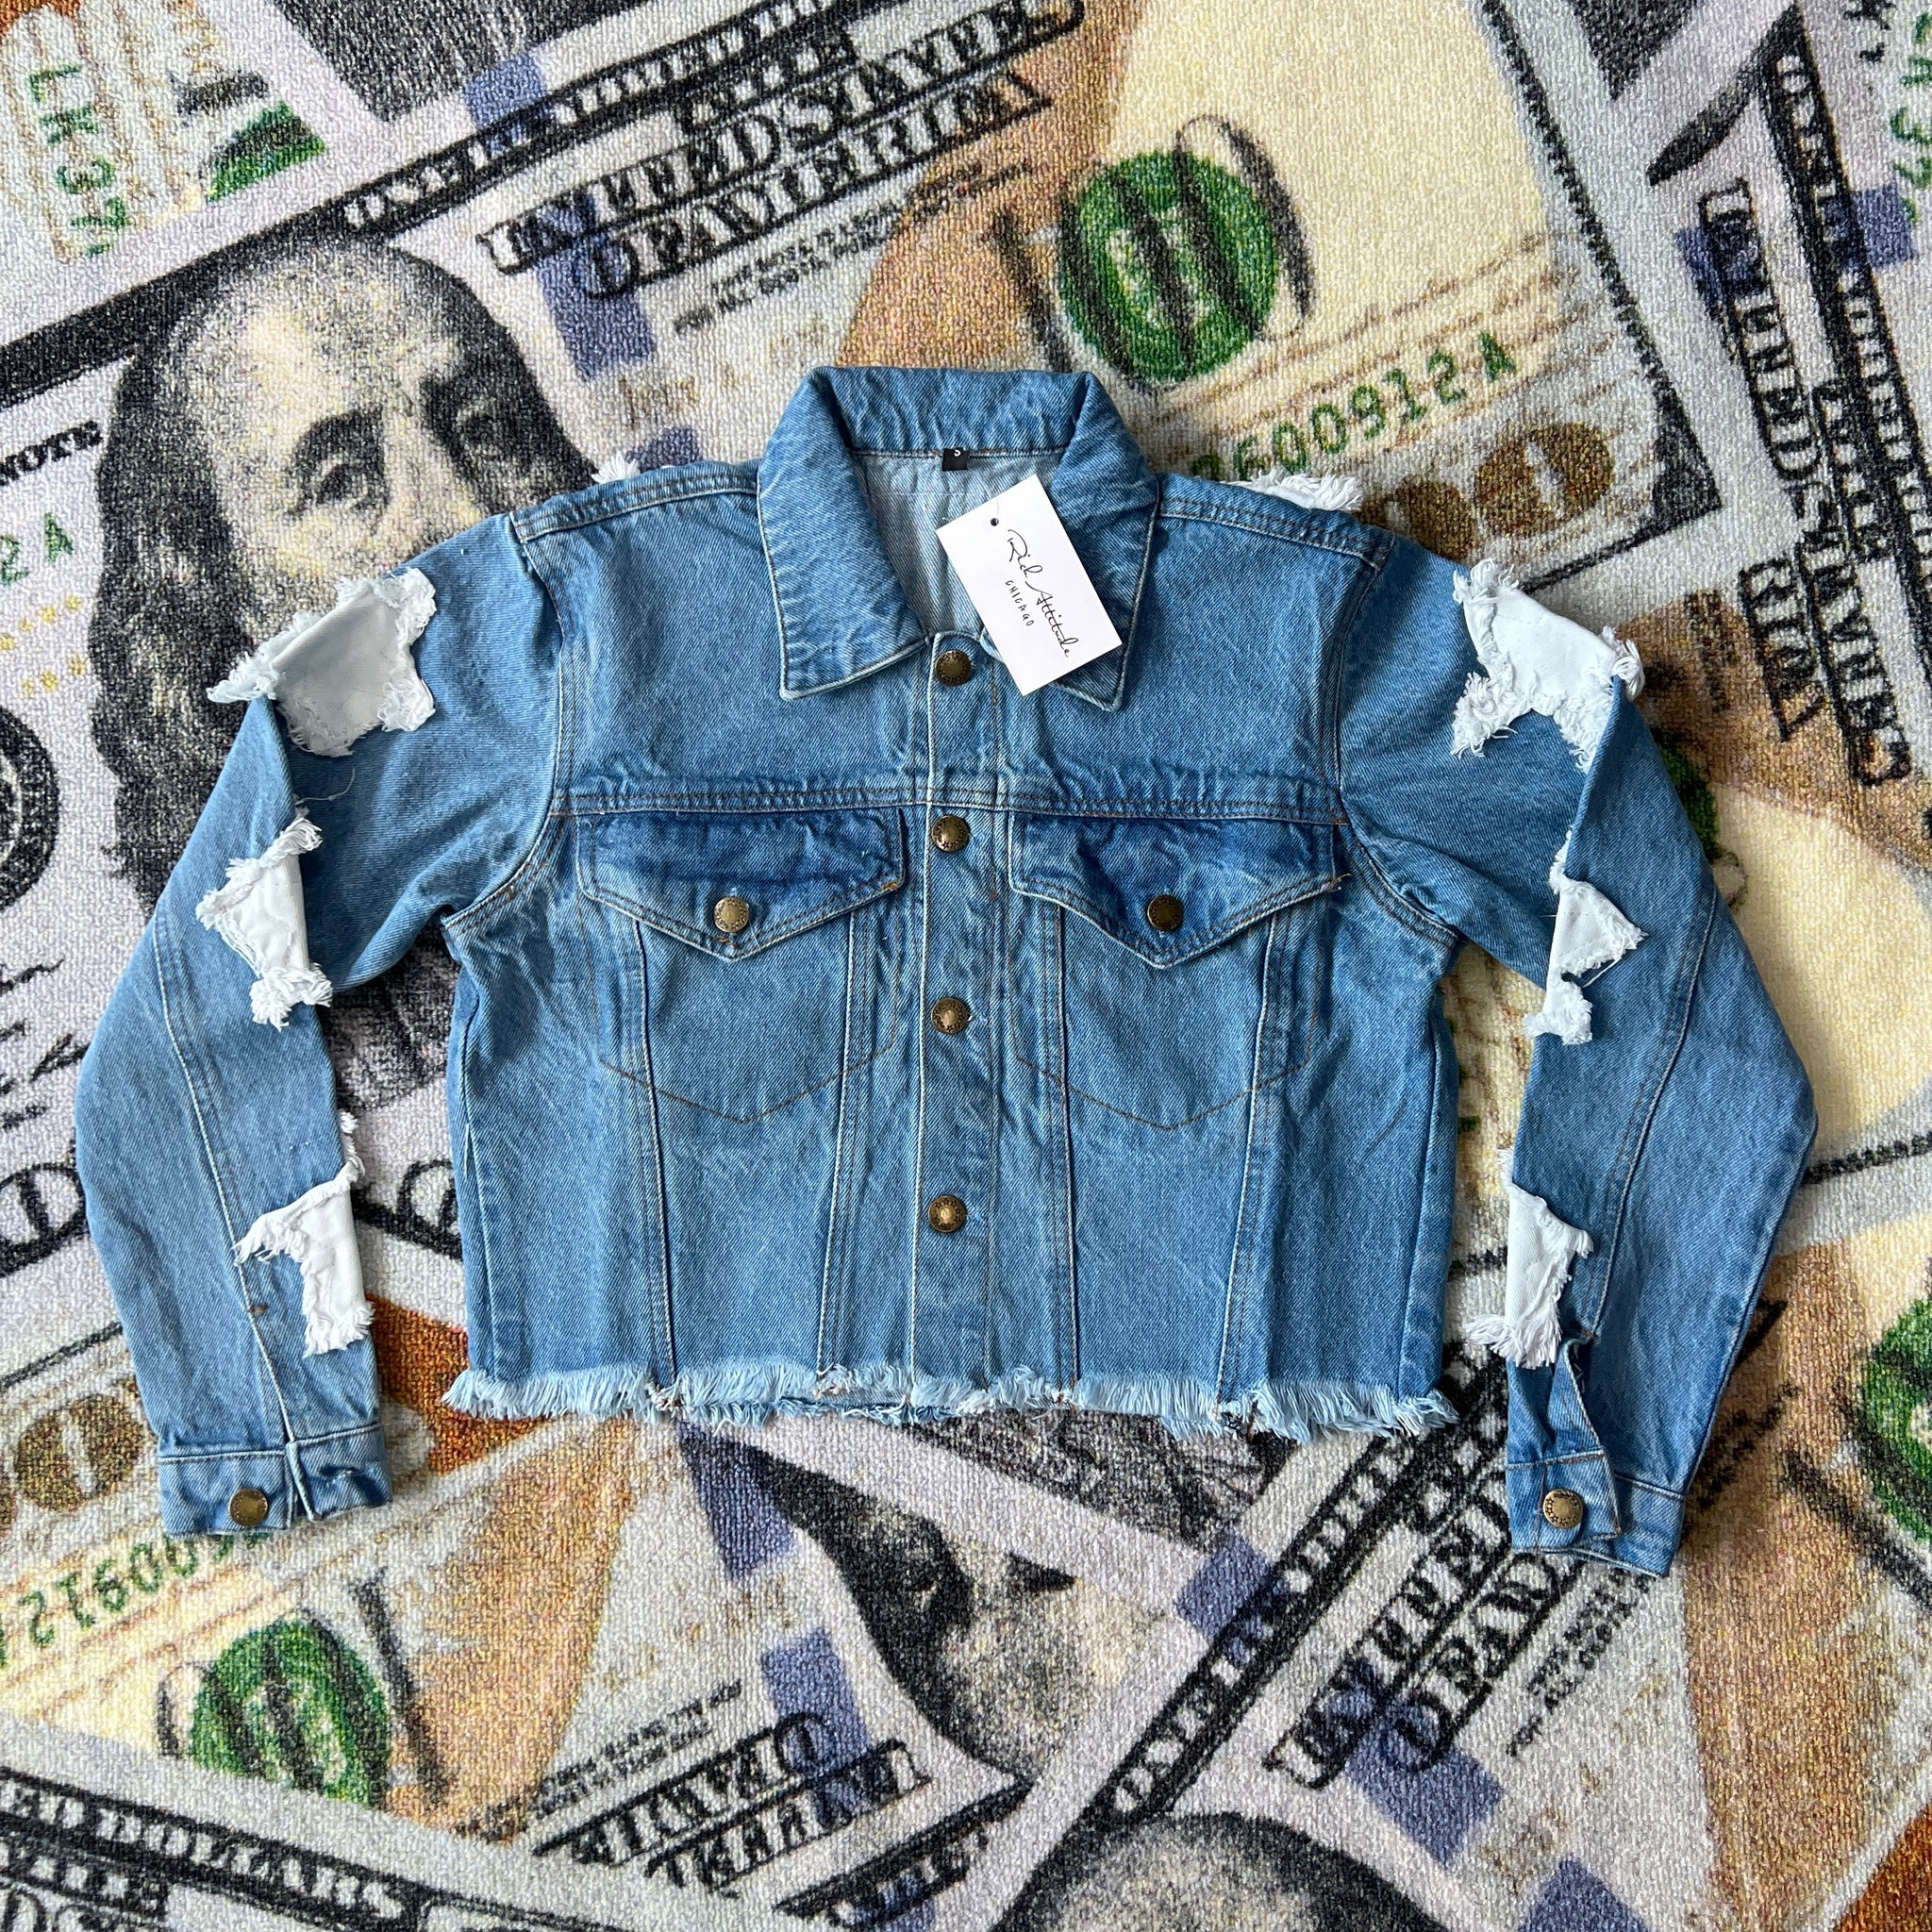 How to make a denim jacket into a vest - Bethany Lynne Makes